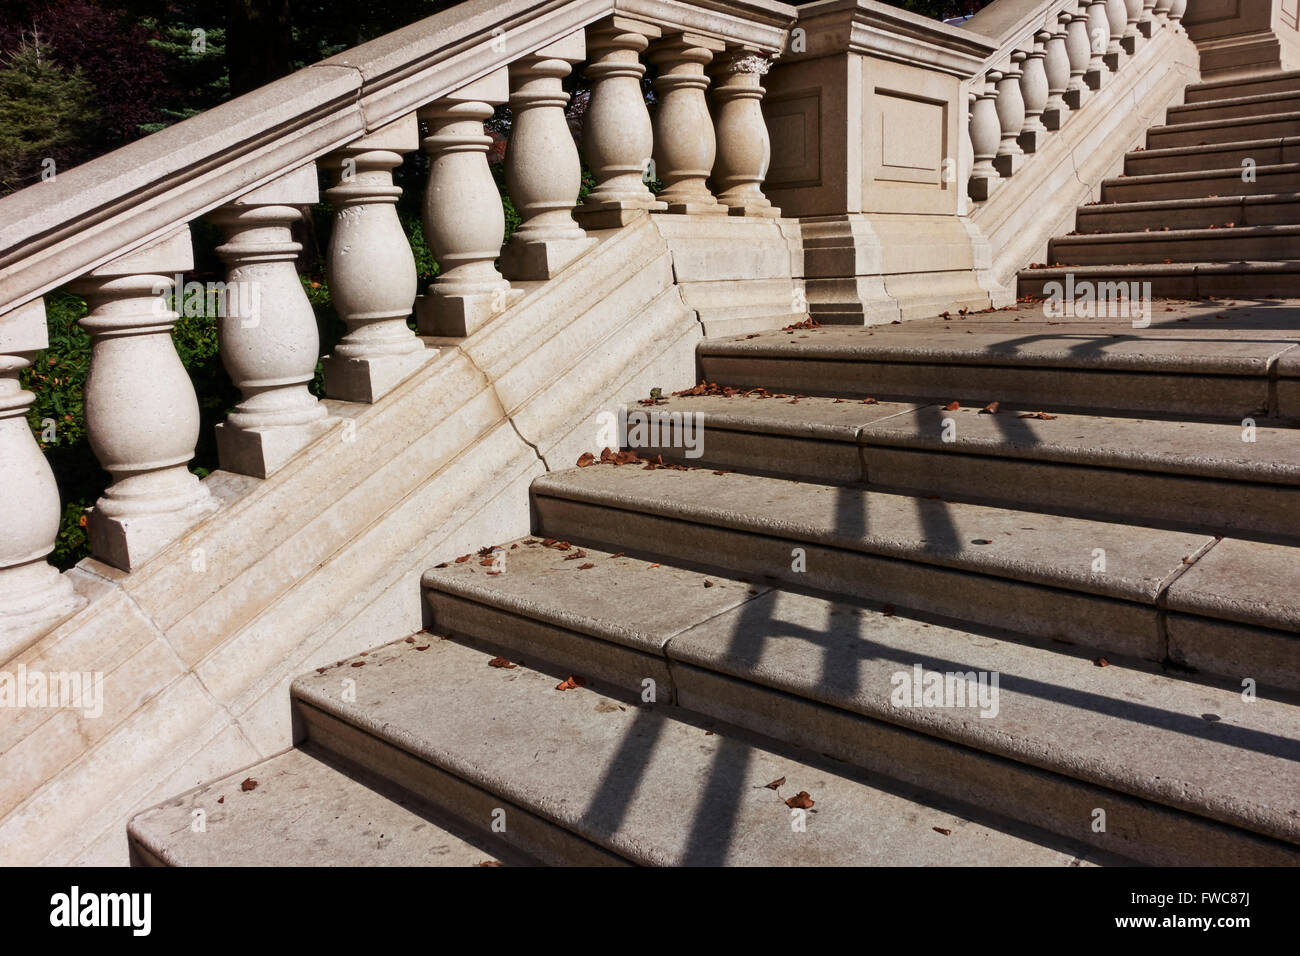 View of outdoor sandstone stairs and balustrades Stock Photo